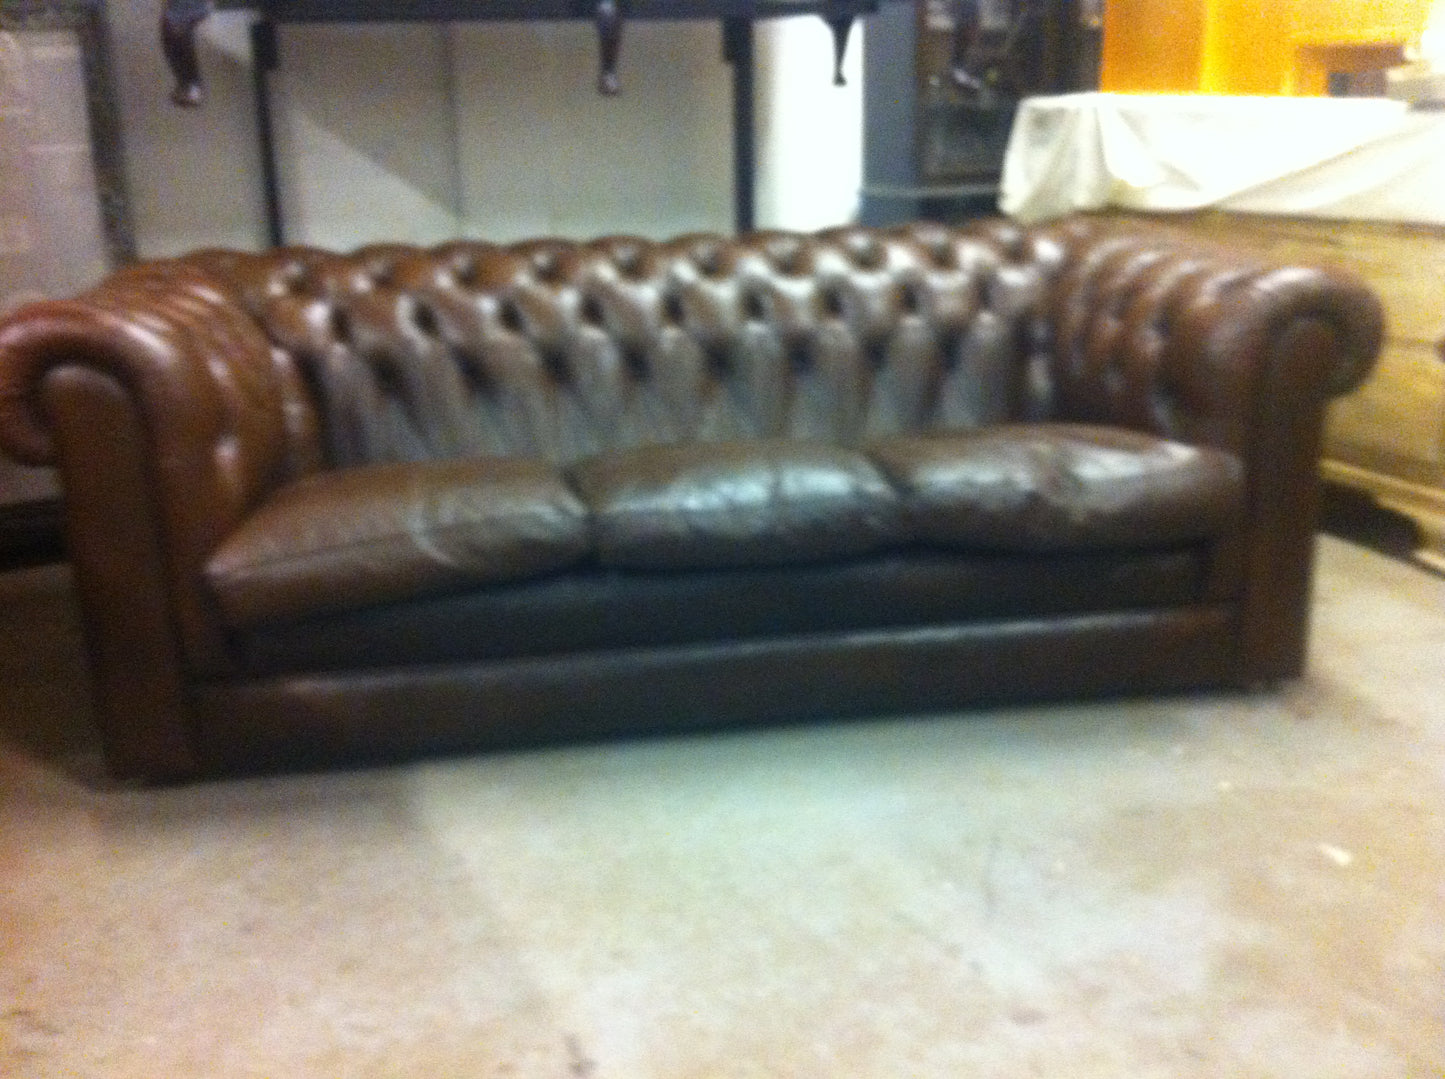 Good Quality 1970's Vintage Mid Brown Leather Chesterfield 3 Seat Sofa